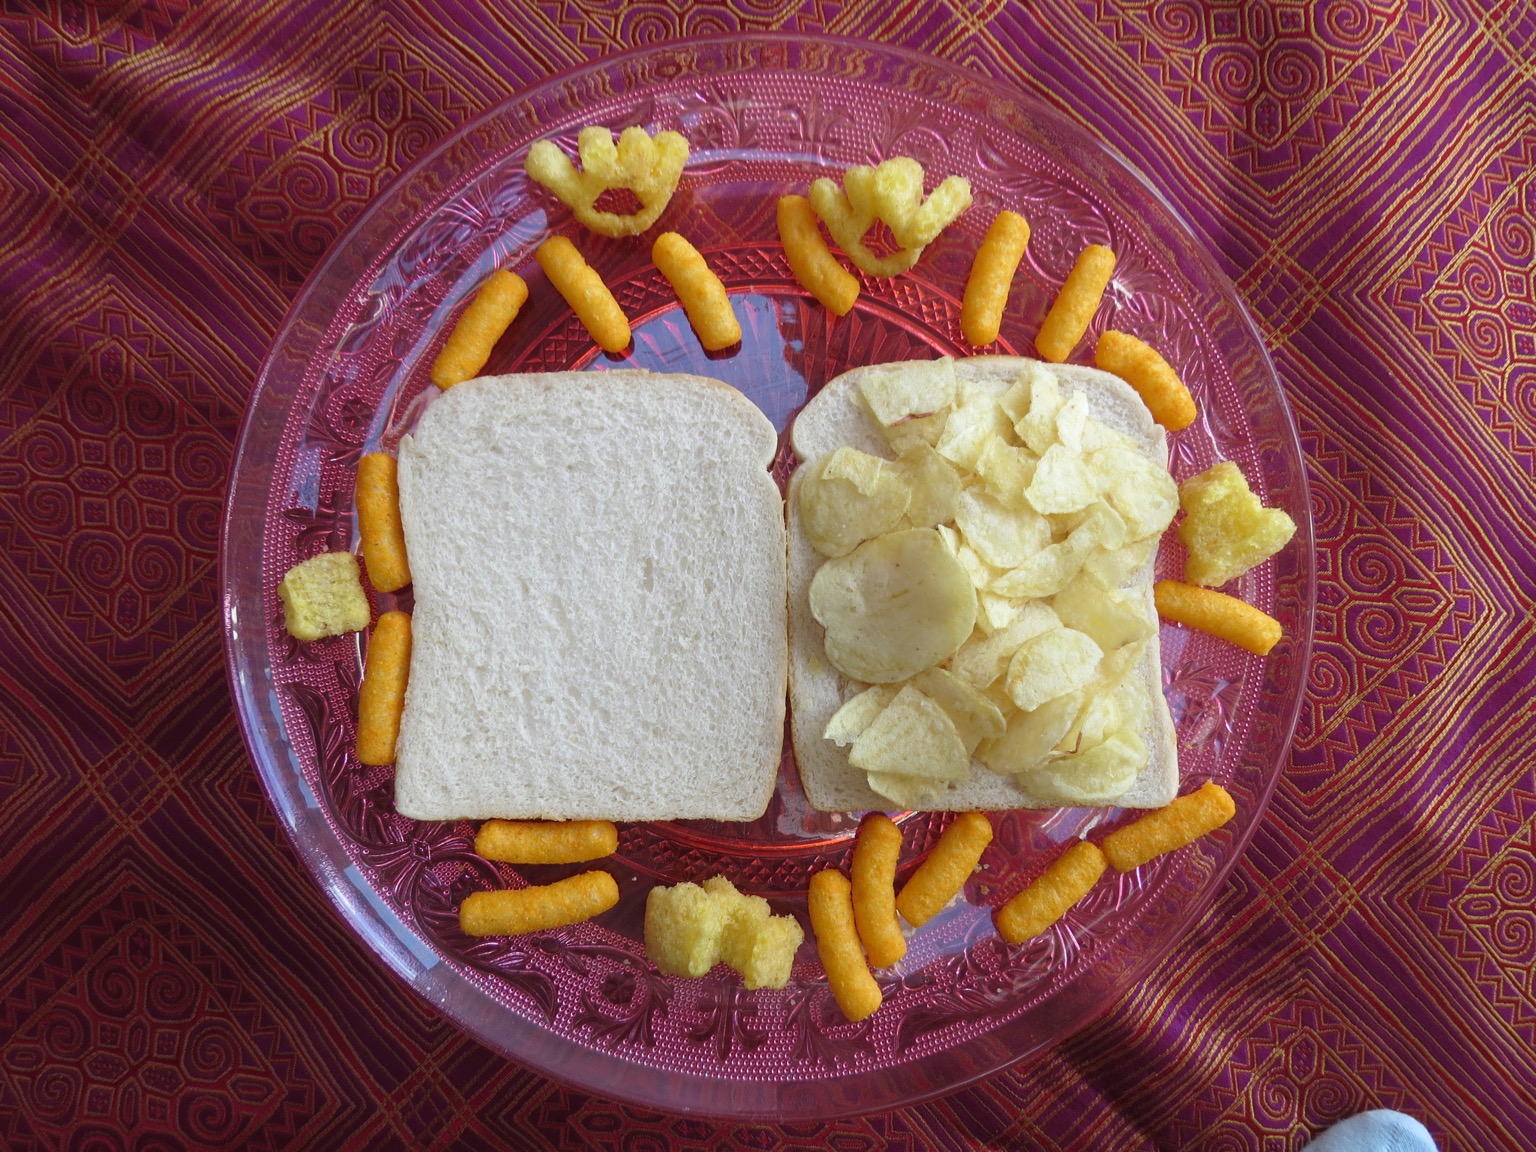 Overhead view of potato crisps on white bread with snacks